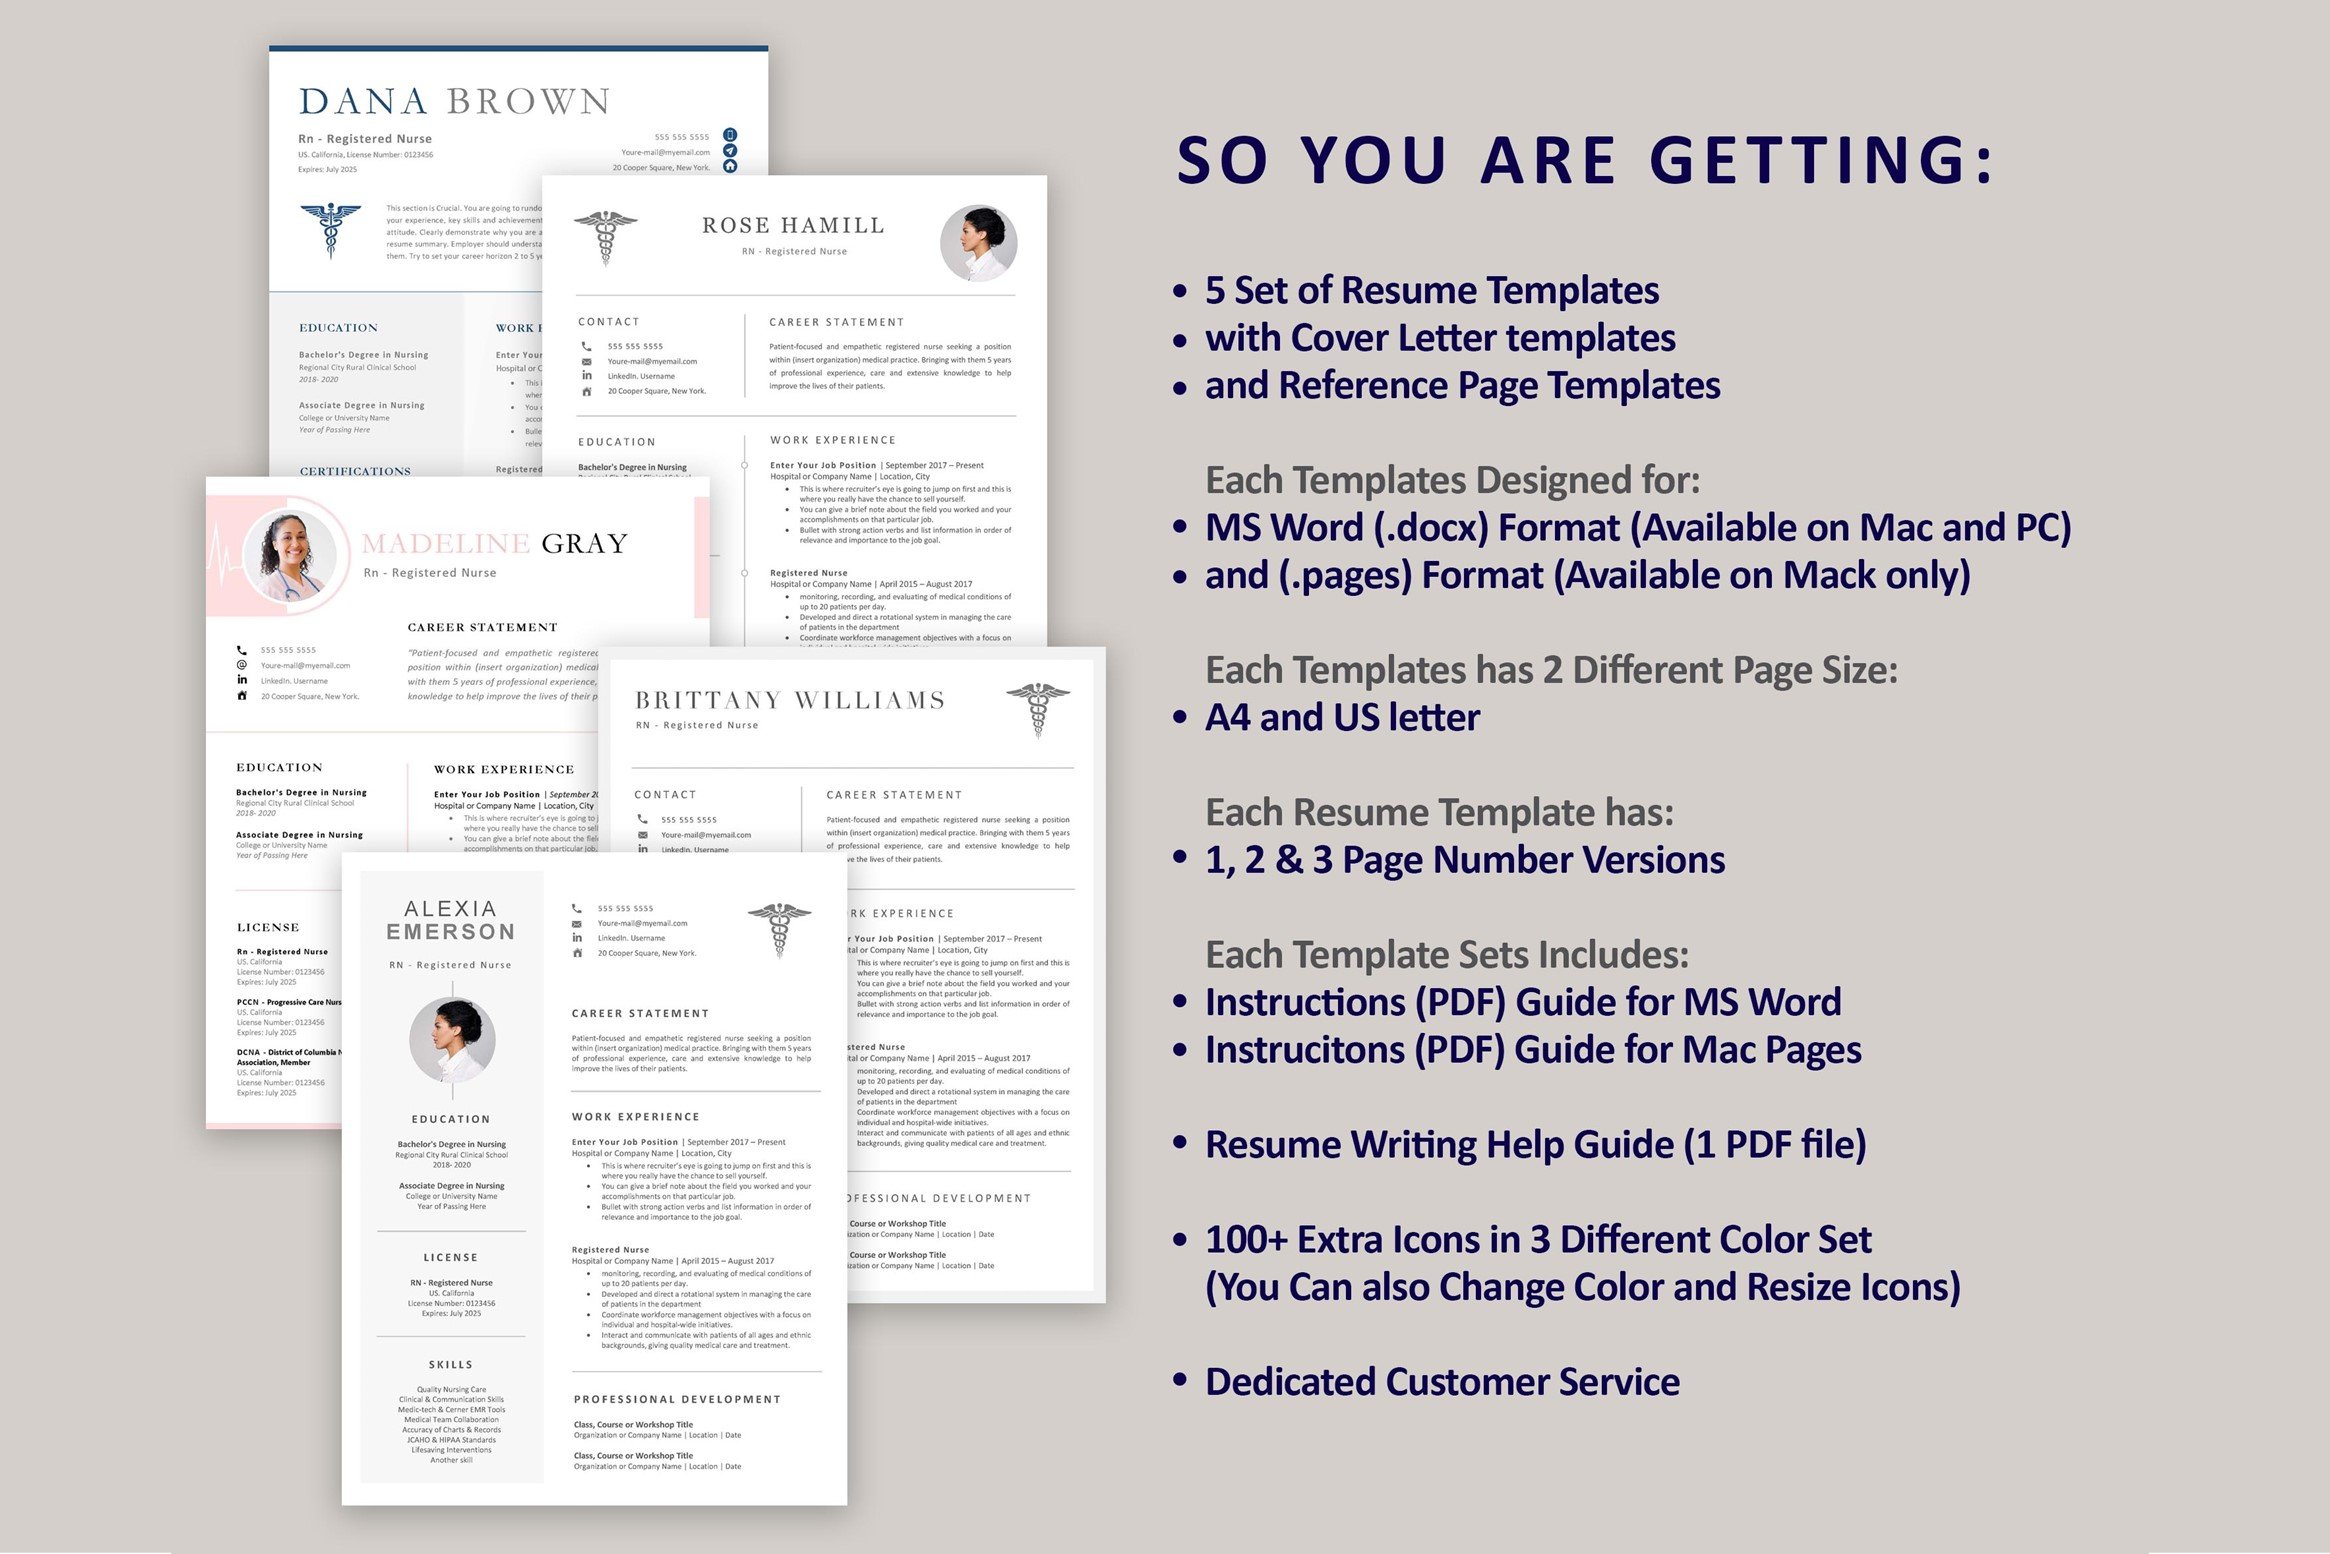 Set of three resume templates with a cover letter.